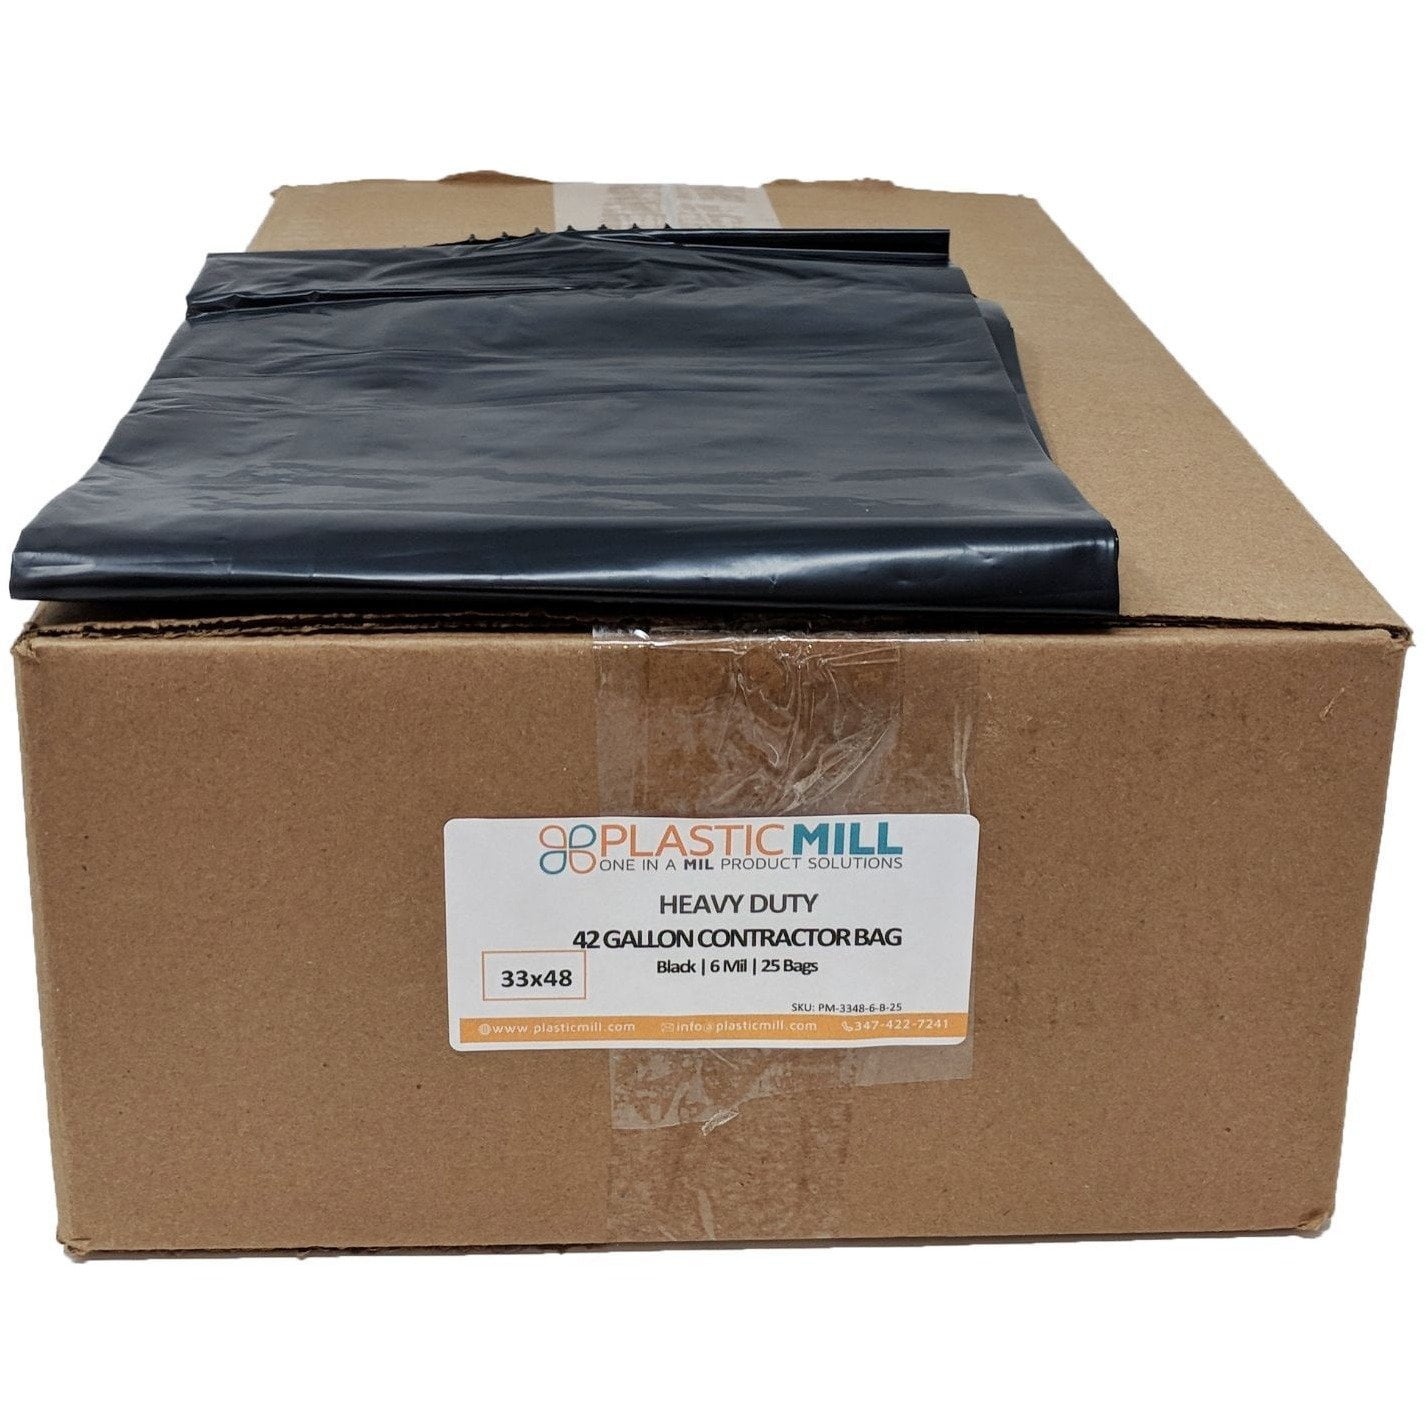 Trash Can Liners. Garbage Bags 33x48 PlasticMill 42 Gallon 